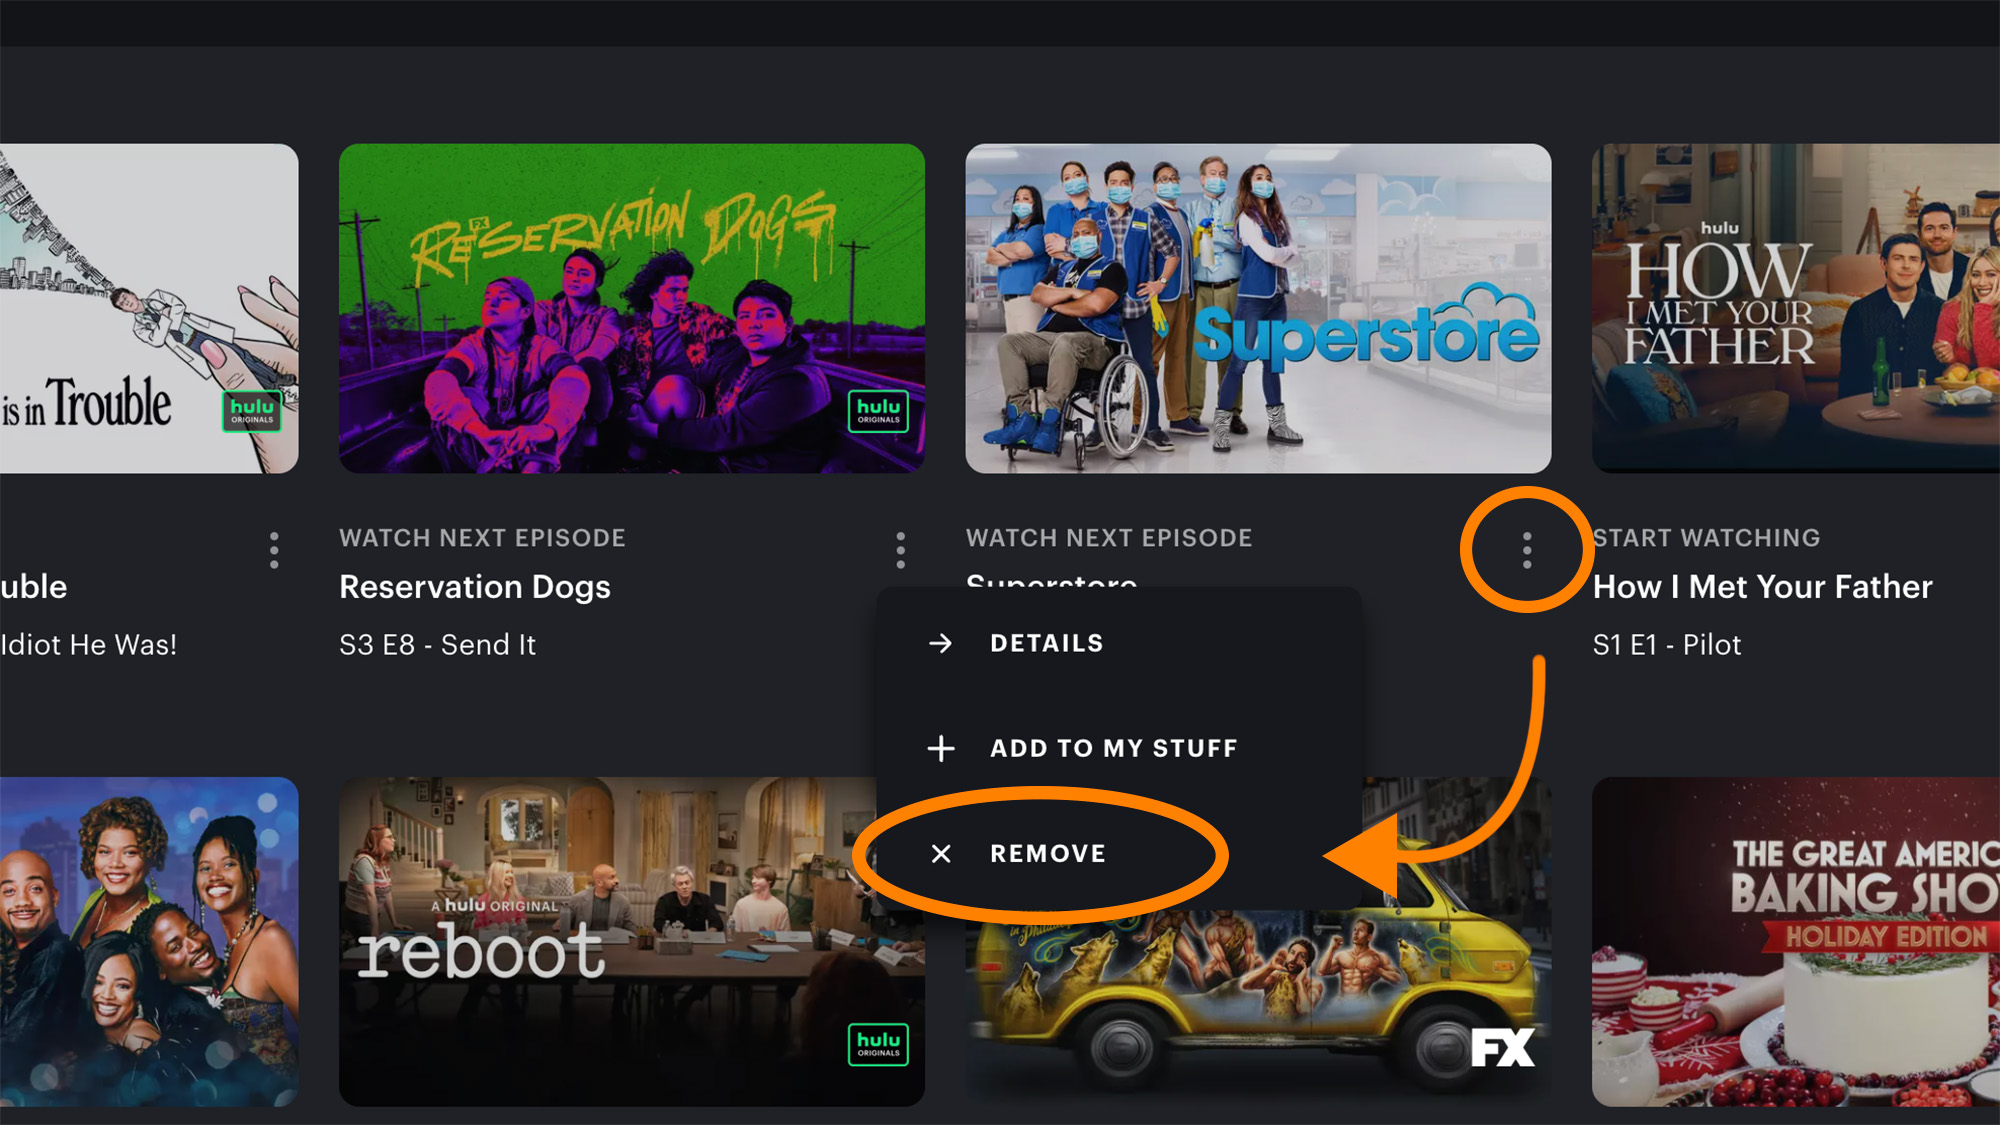 Hulu's remove from viewing history menu